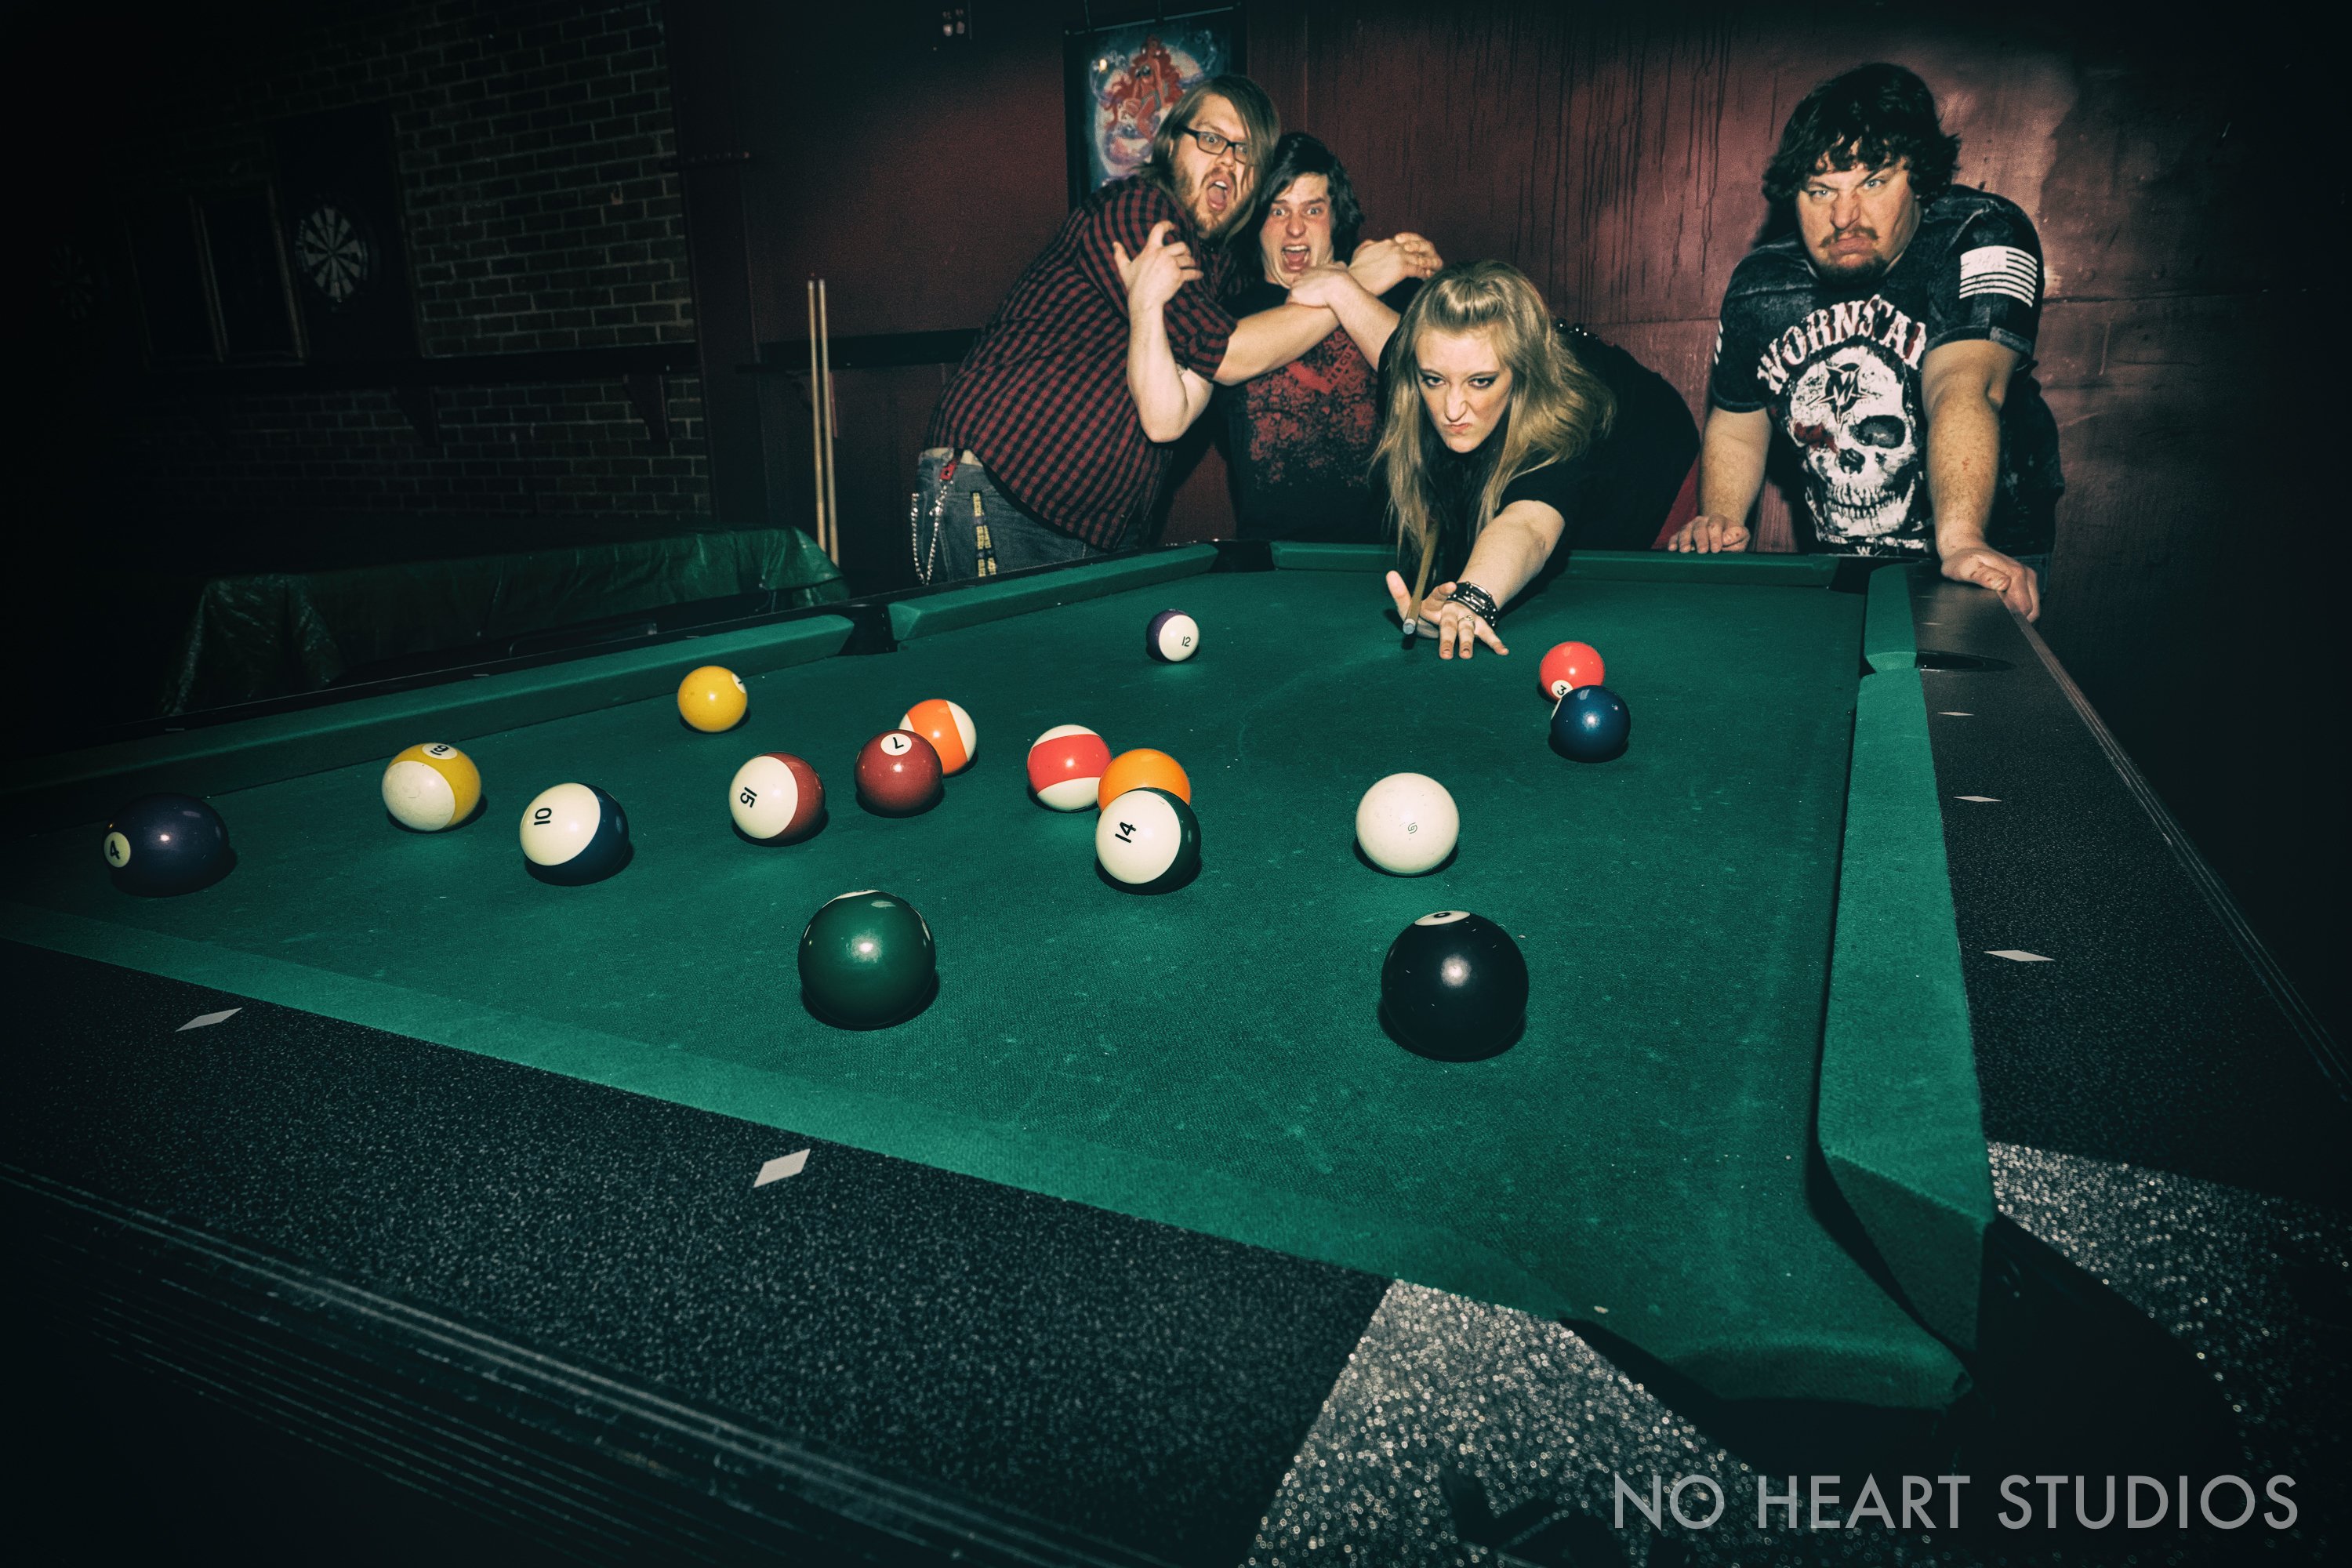 Taylor Swift does not play billiards correctly